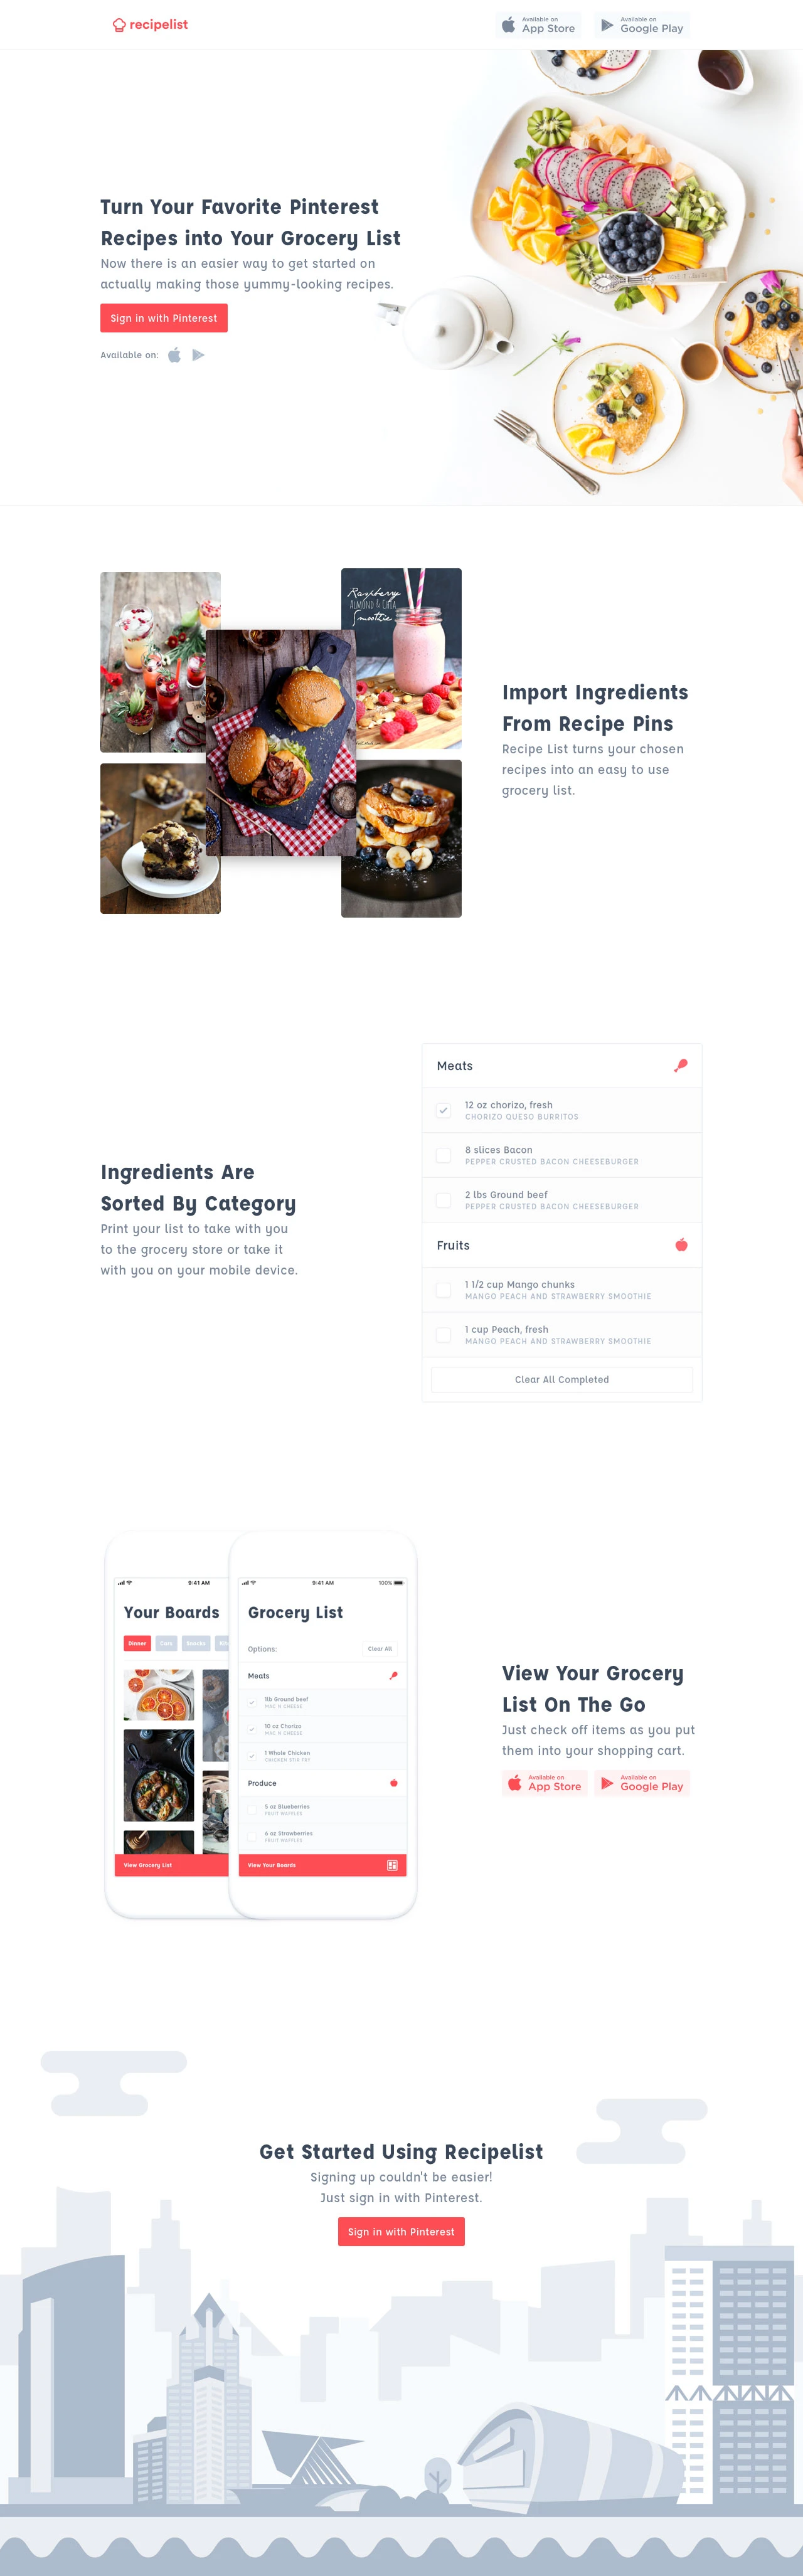 Recipelist Landing Page Example: Import your Pinterest recipes to create grocery lists. Now there is an easier way to get started on actually making those yummy-looking recipes.